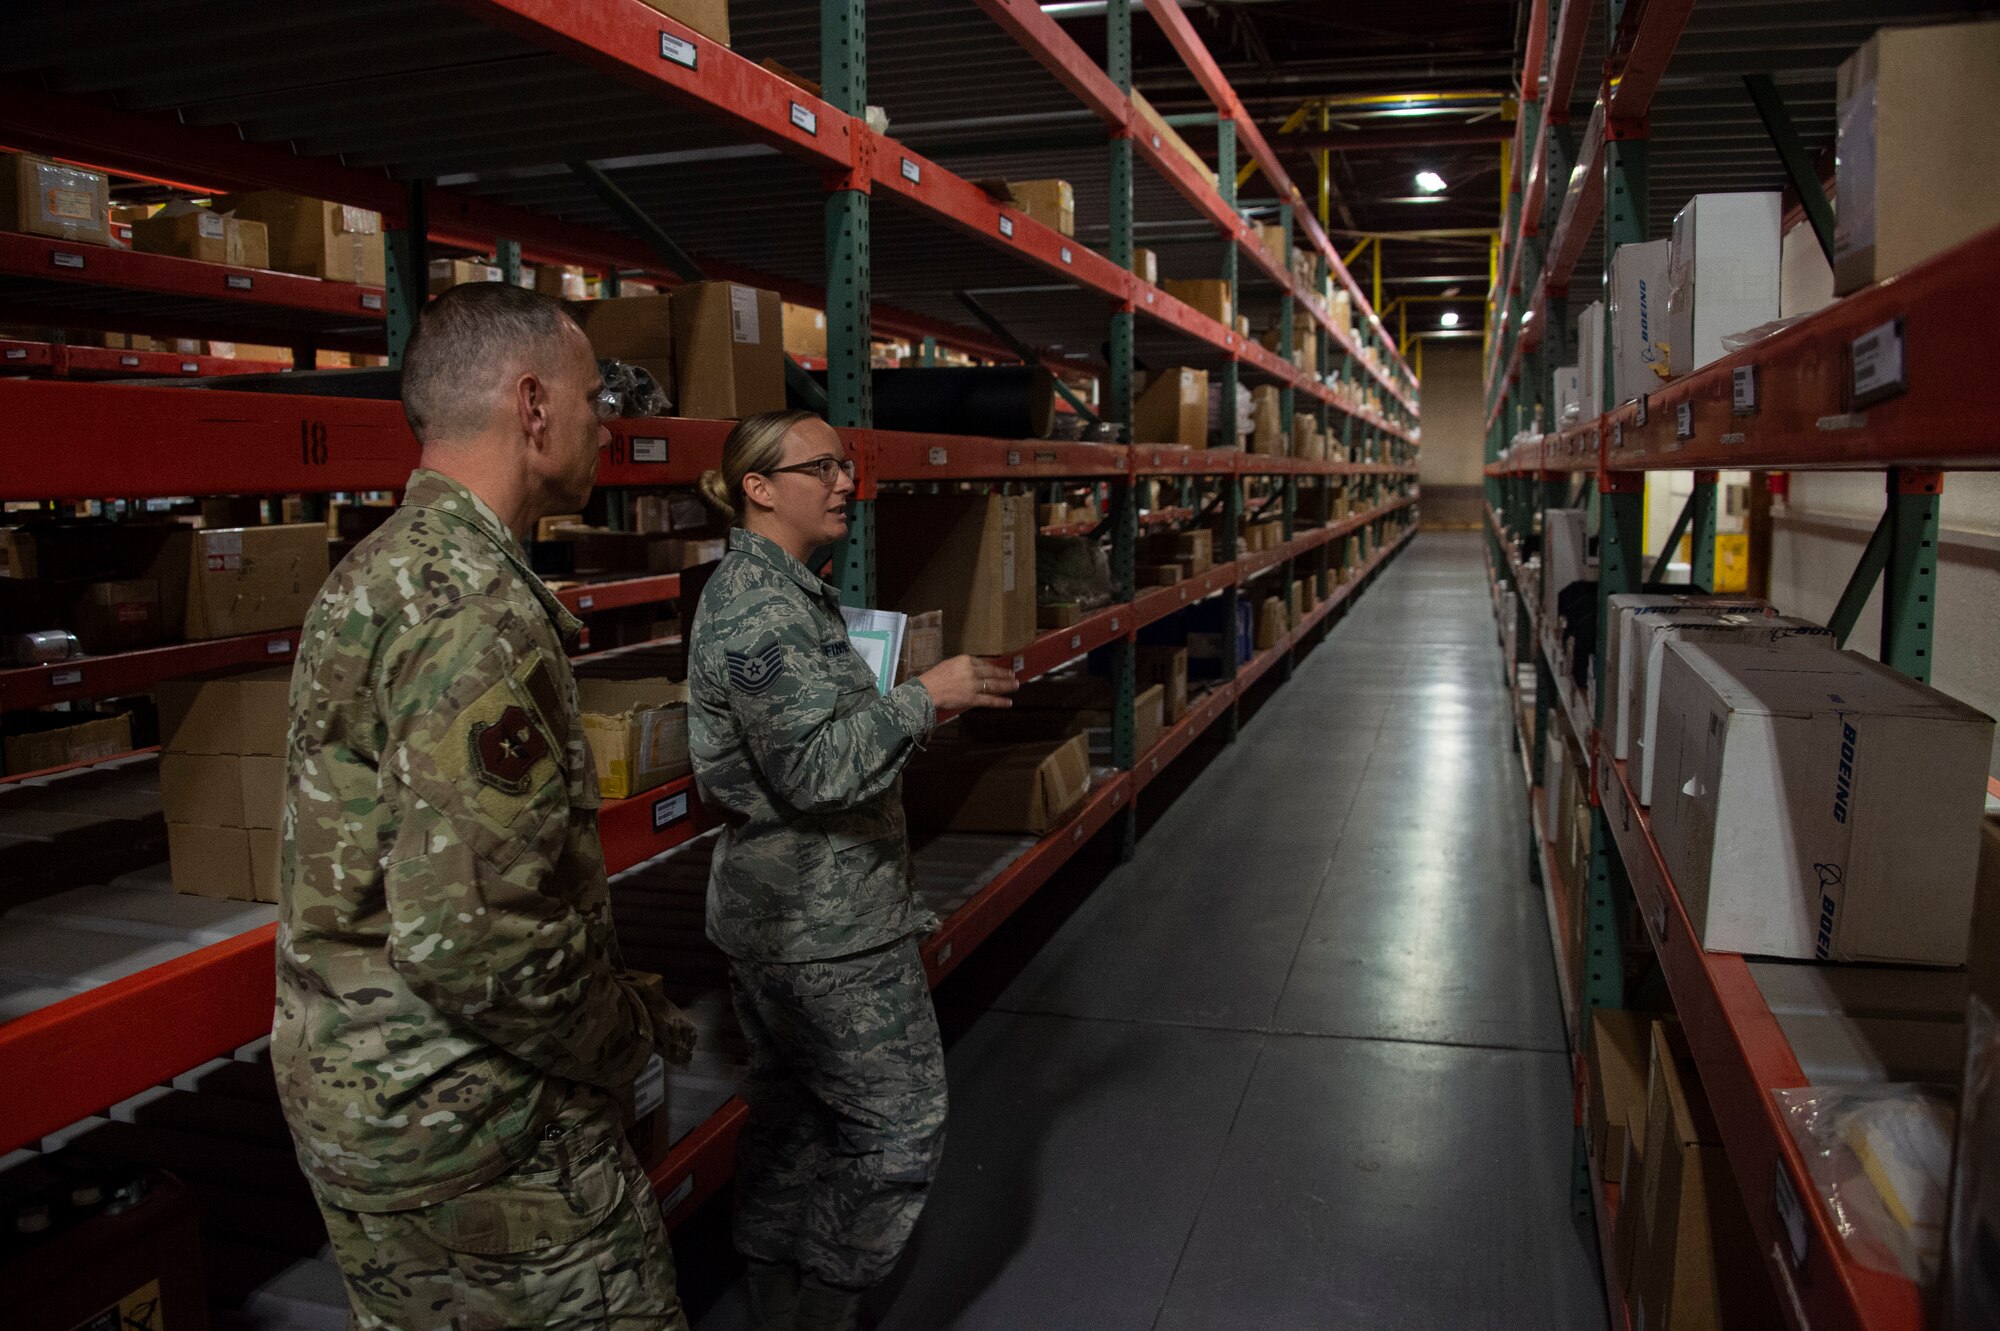 U.S. Air Force Tech Sgt. Nicole Finnegan, 97th Logistics Readiness Squadron NCO in charge of storage and issue, showcases the supply facility to Chief Master Sgt. Erik Thompson, command chief of the 19th Air Force